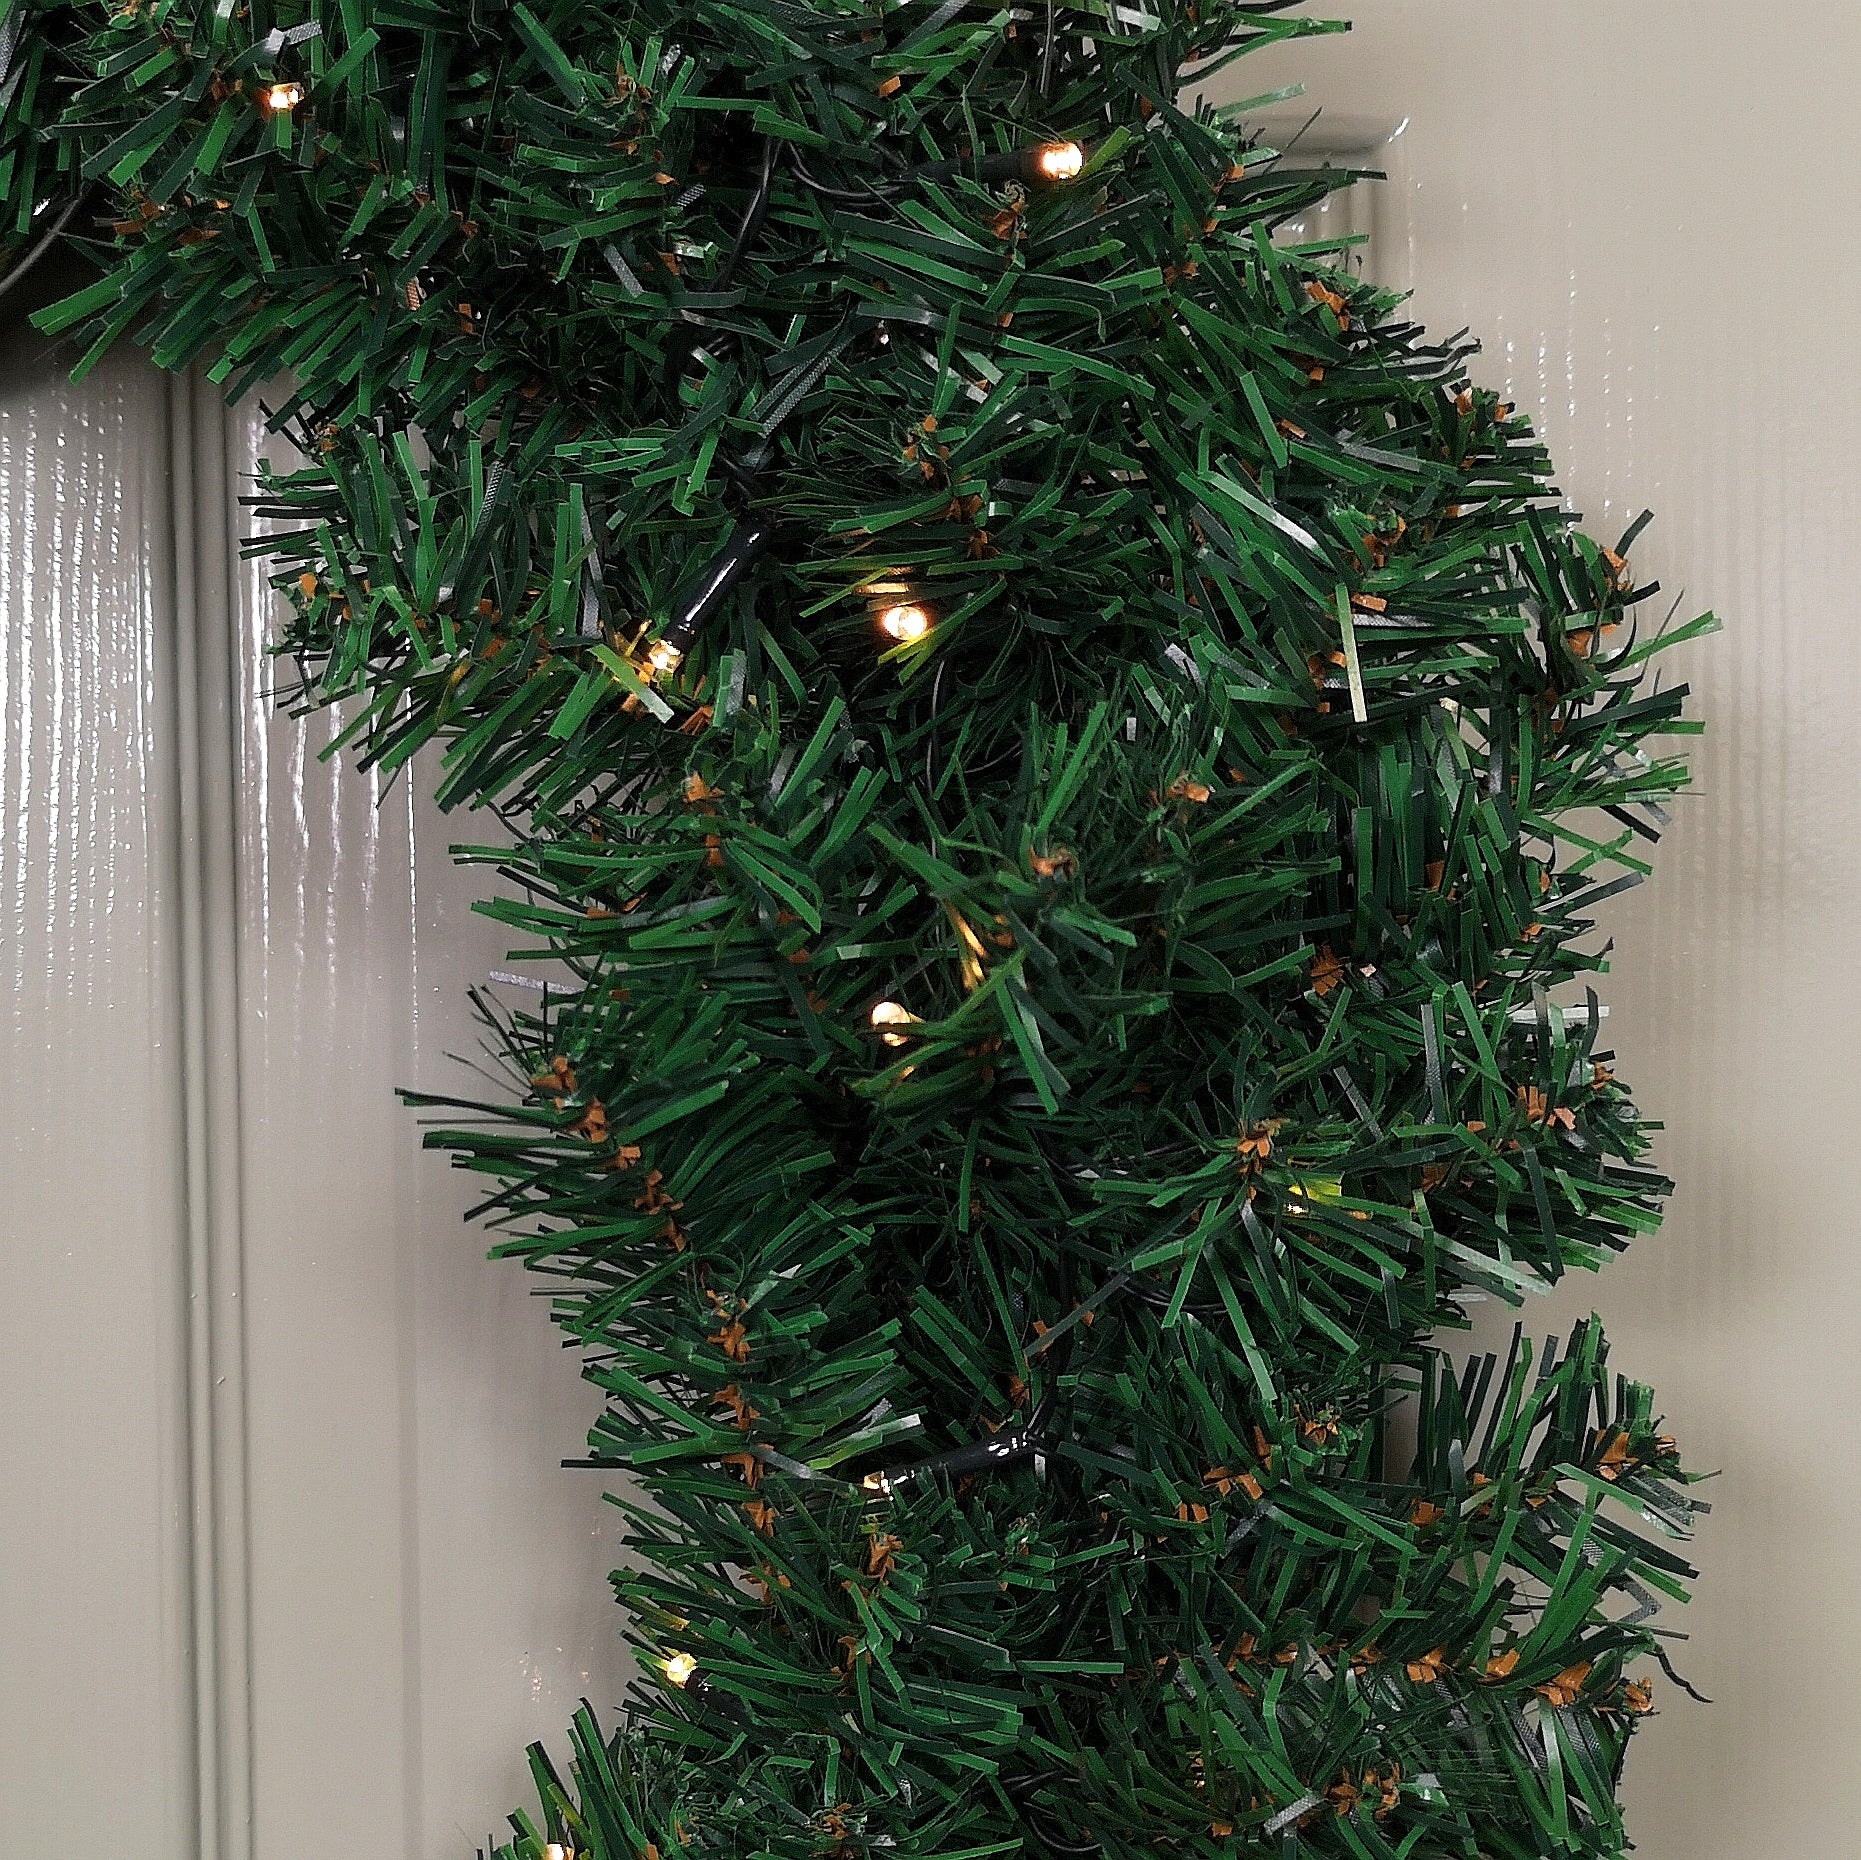 60cm Pre Lit Plain Green Christmas Wreath with Warm White LEDs and 160 Tips